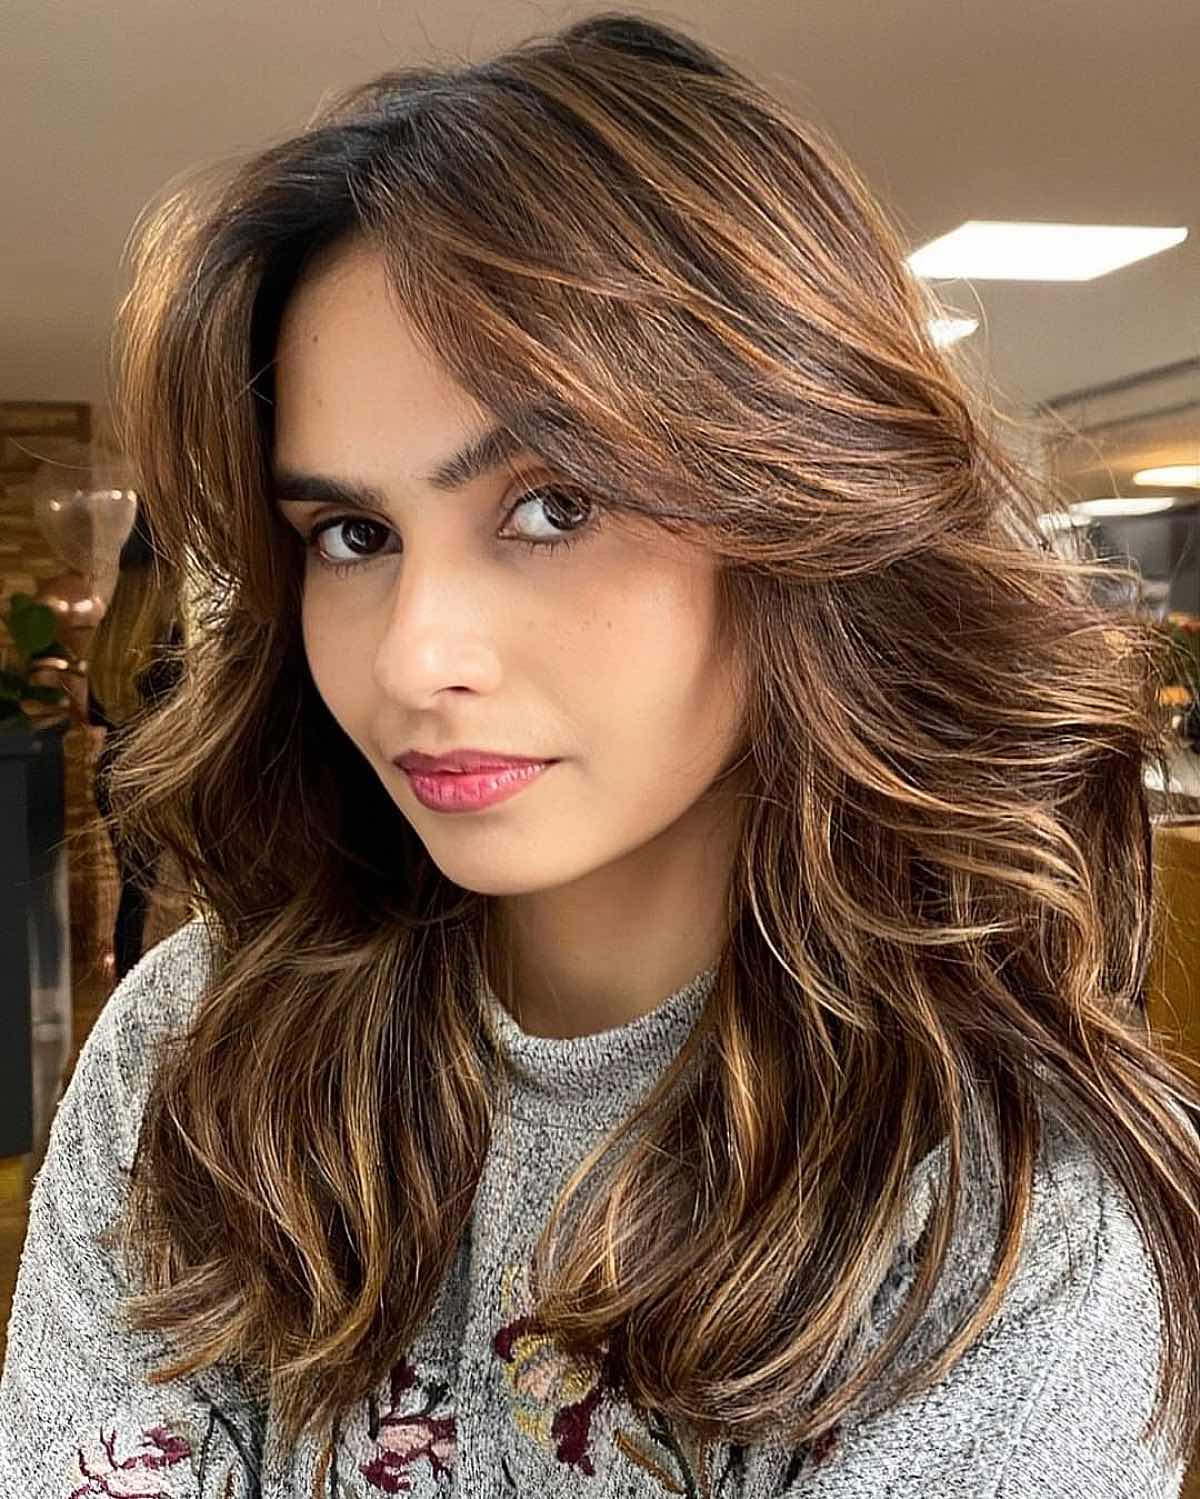 61 Stunning Brown Balayage Hair Color Ideas You Don't Want to Miss